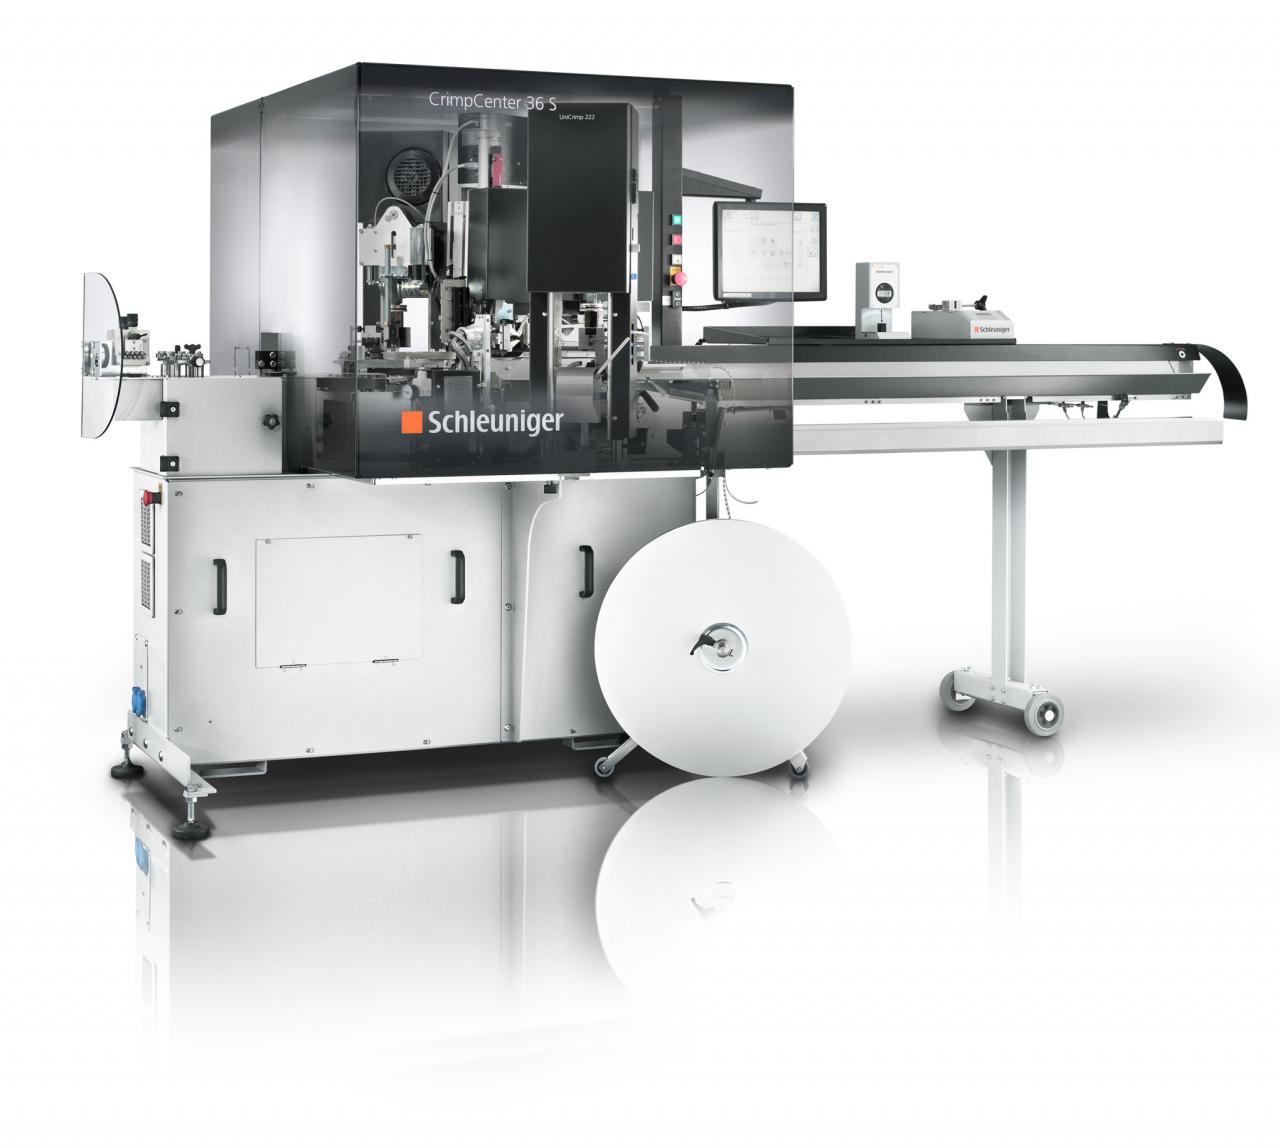 DECA Manufacturing Boosts Productivity with Schleuniger